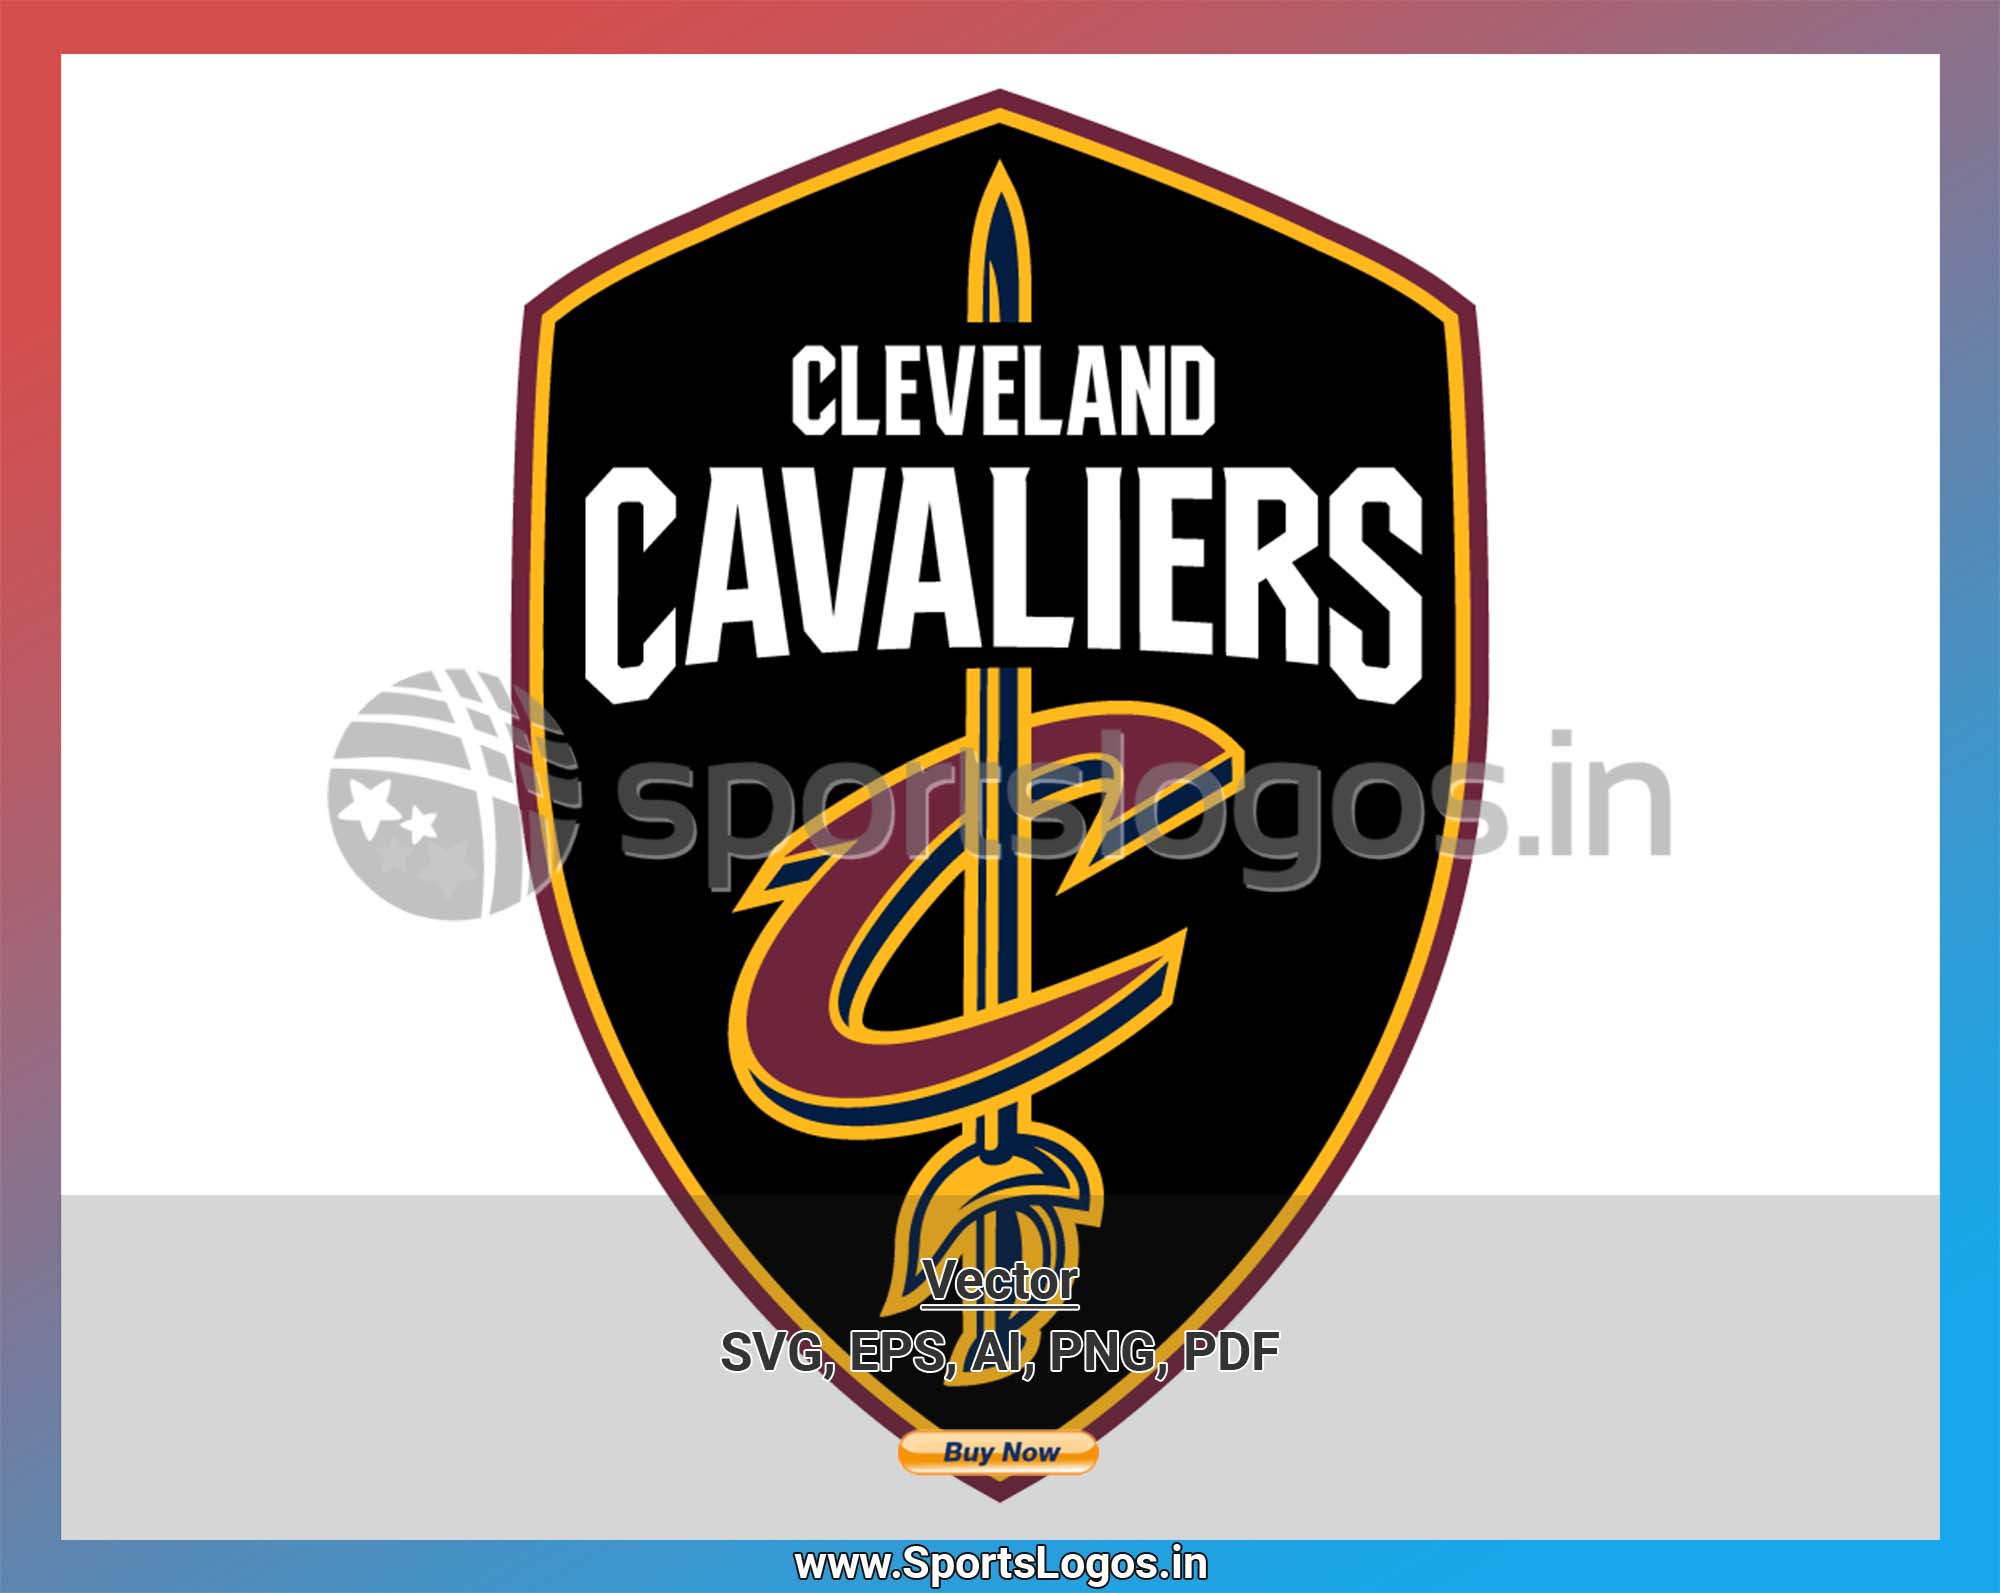 Cleveland Cavaliers logo, material design, American basketball